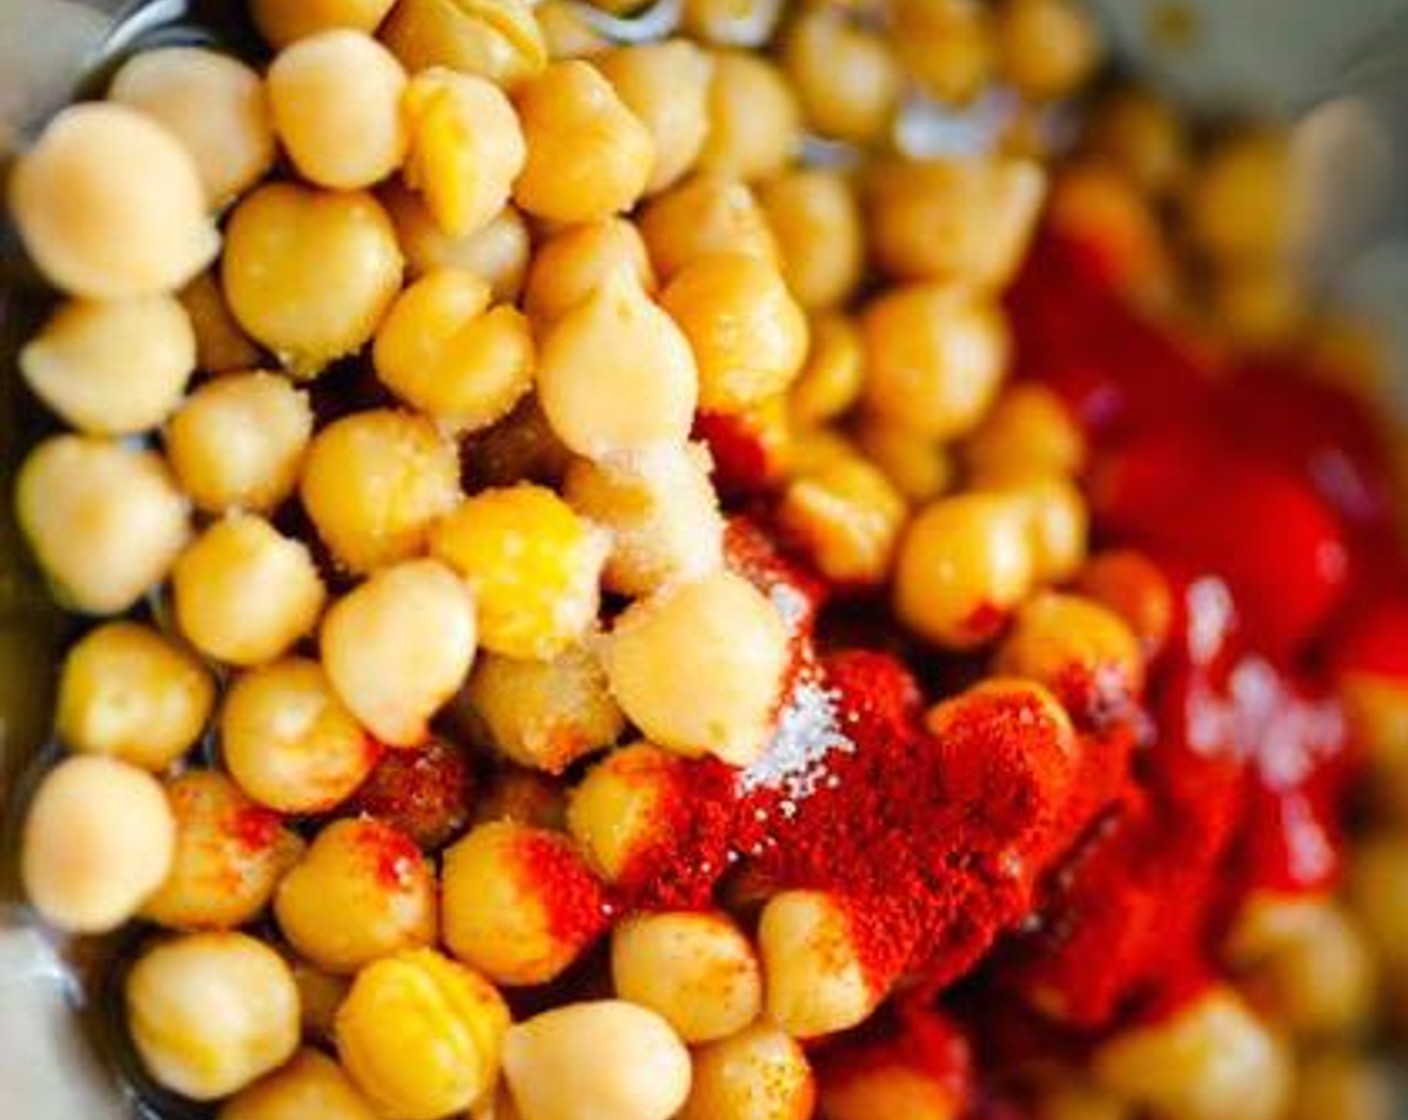 step 2 Pat dry Chickpeas (1 can) with paper towels then mix with Olive Oil (1 Tbsp), Tamari Soy Sauce (1 Tbsp), Sriracha (1/2 Tbsp), Maple Syrup (1 tsp), Smoked Paprika (1/2 tsp), Salt (1/4 tsp) and Ground Black Pepper (1/4 tsp). Spread onto half of a parchment paper-lined baking sheet.